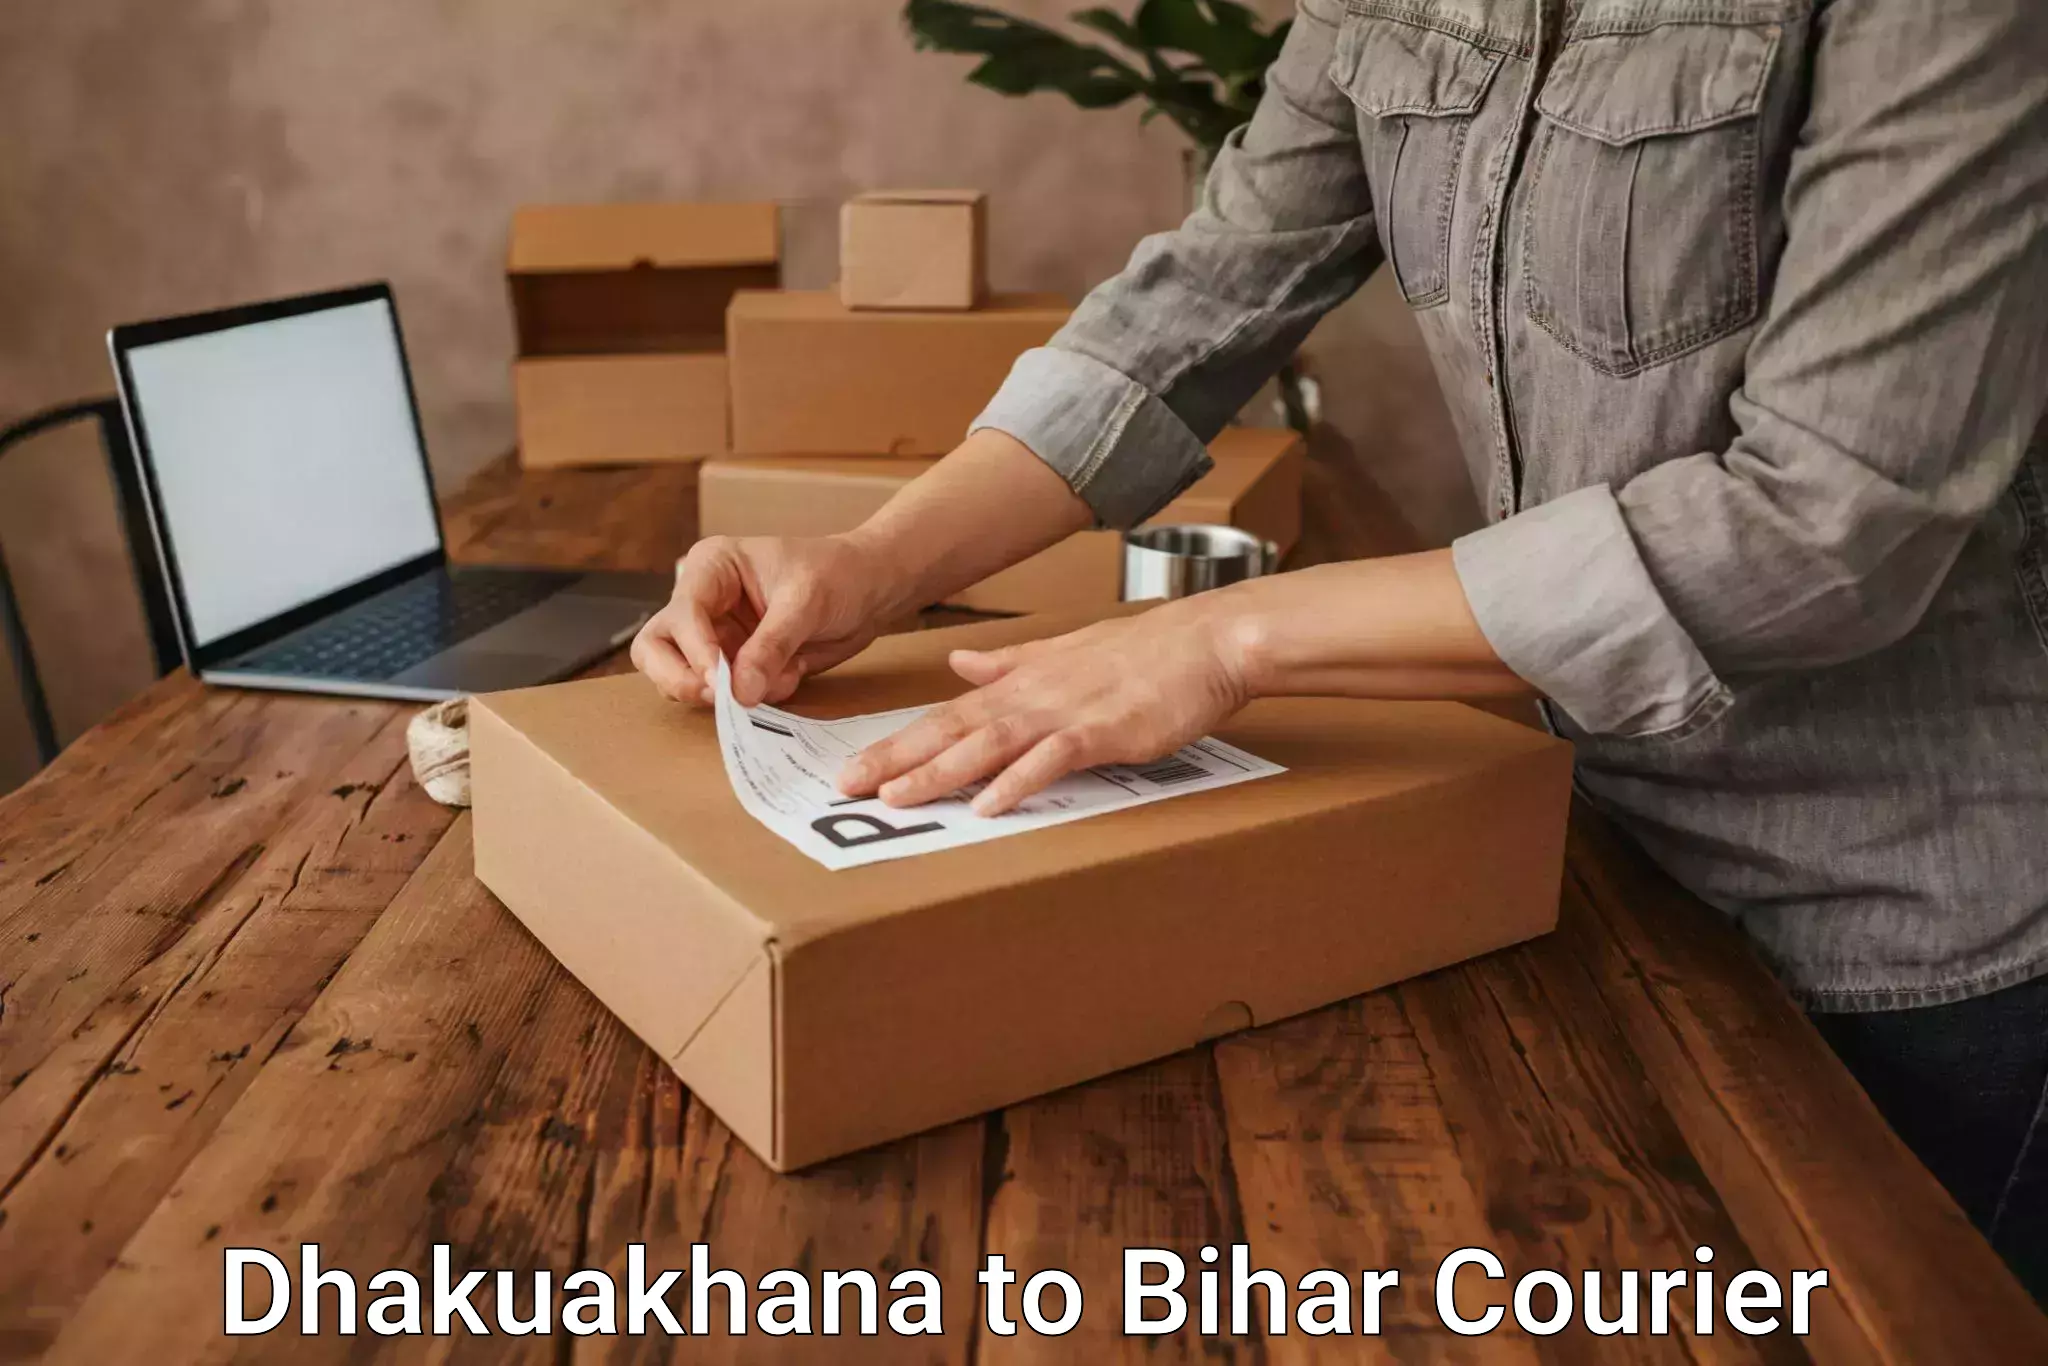 24-hour courier service Dhakuakhana to Bhorey